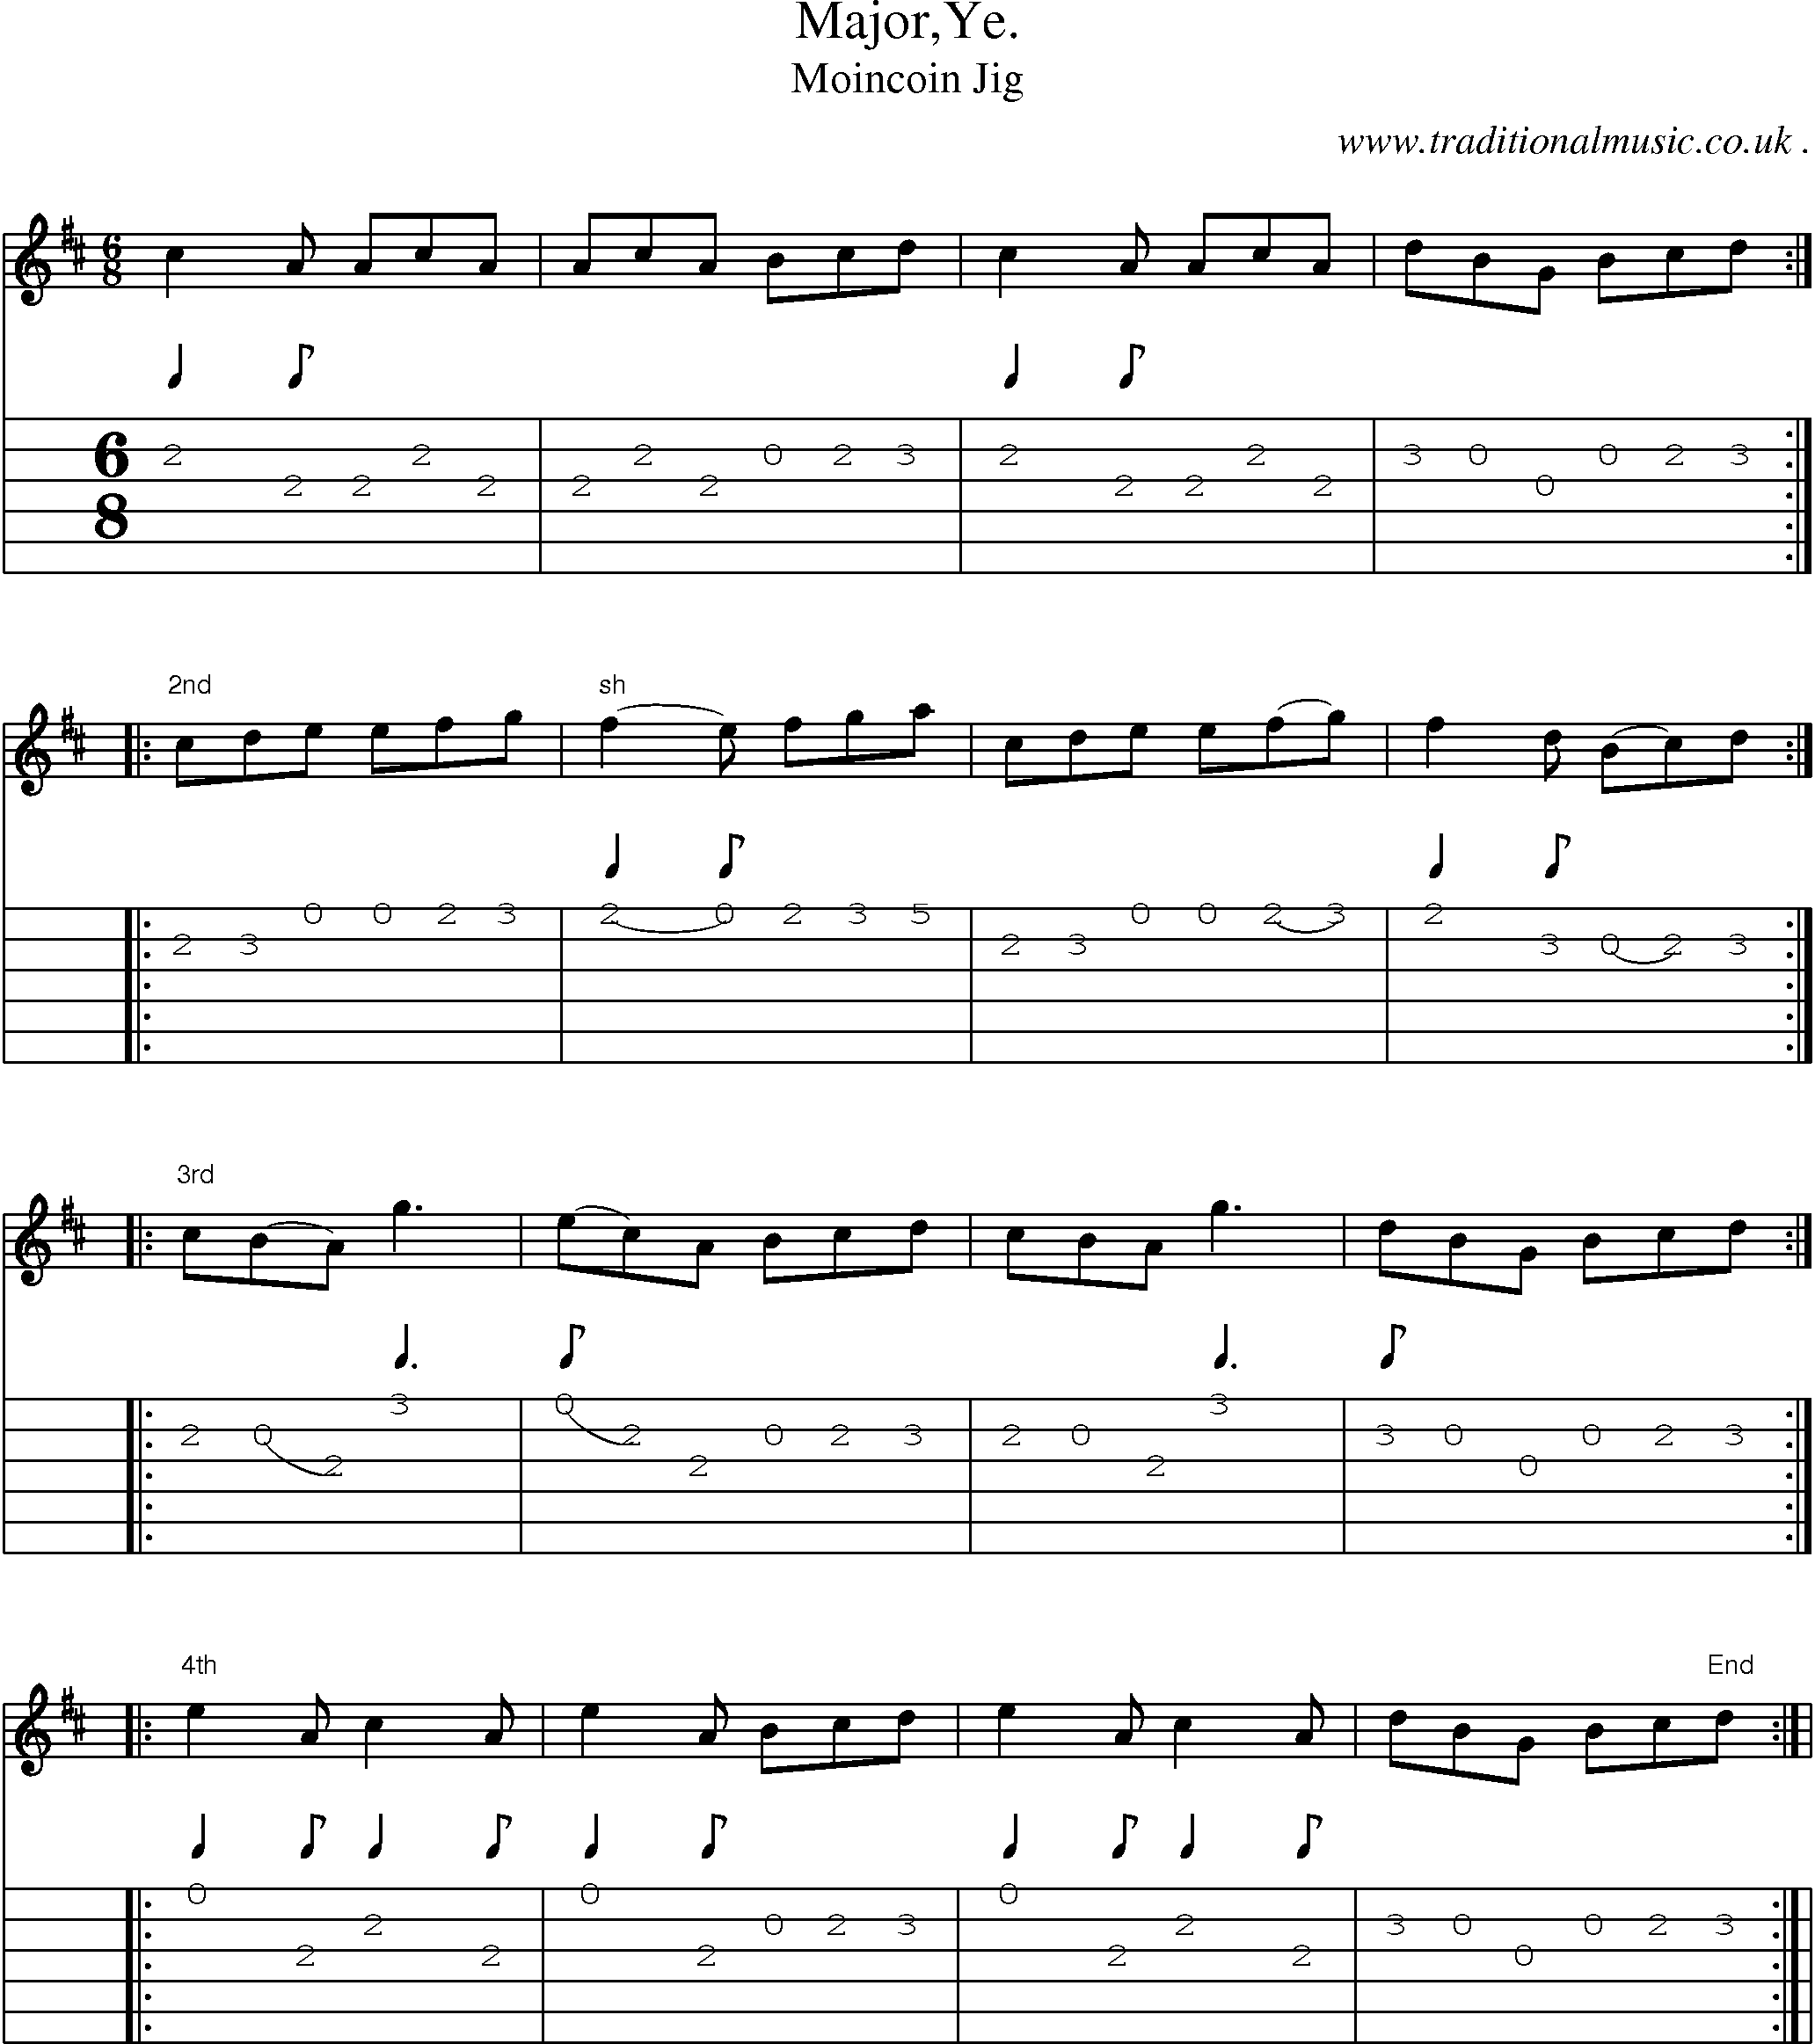 Sheet-Music and Guitar Tabs for Majorye